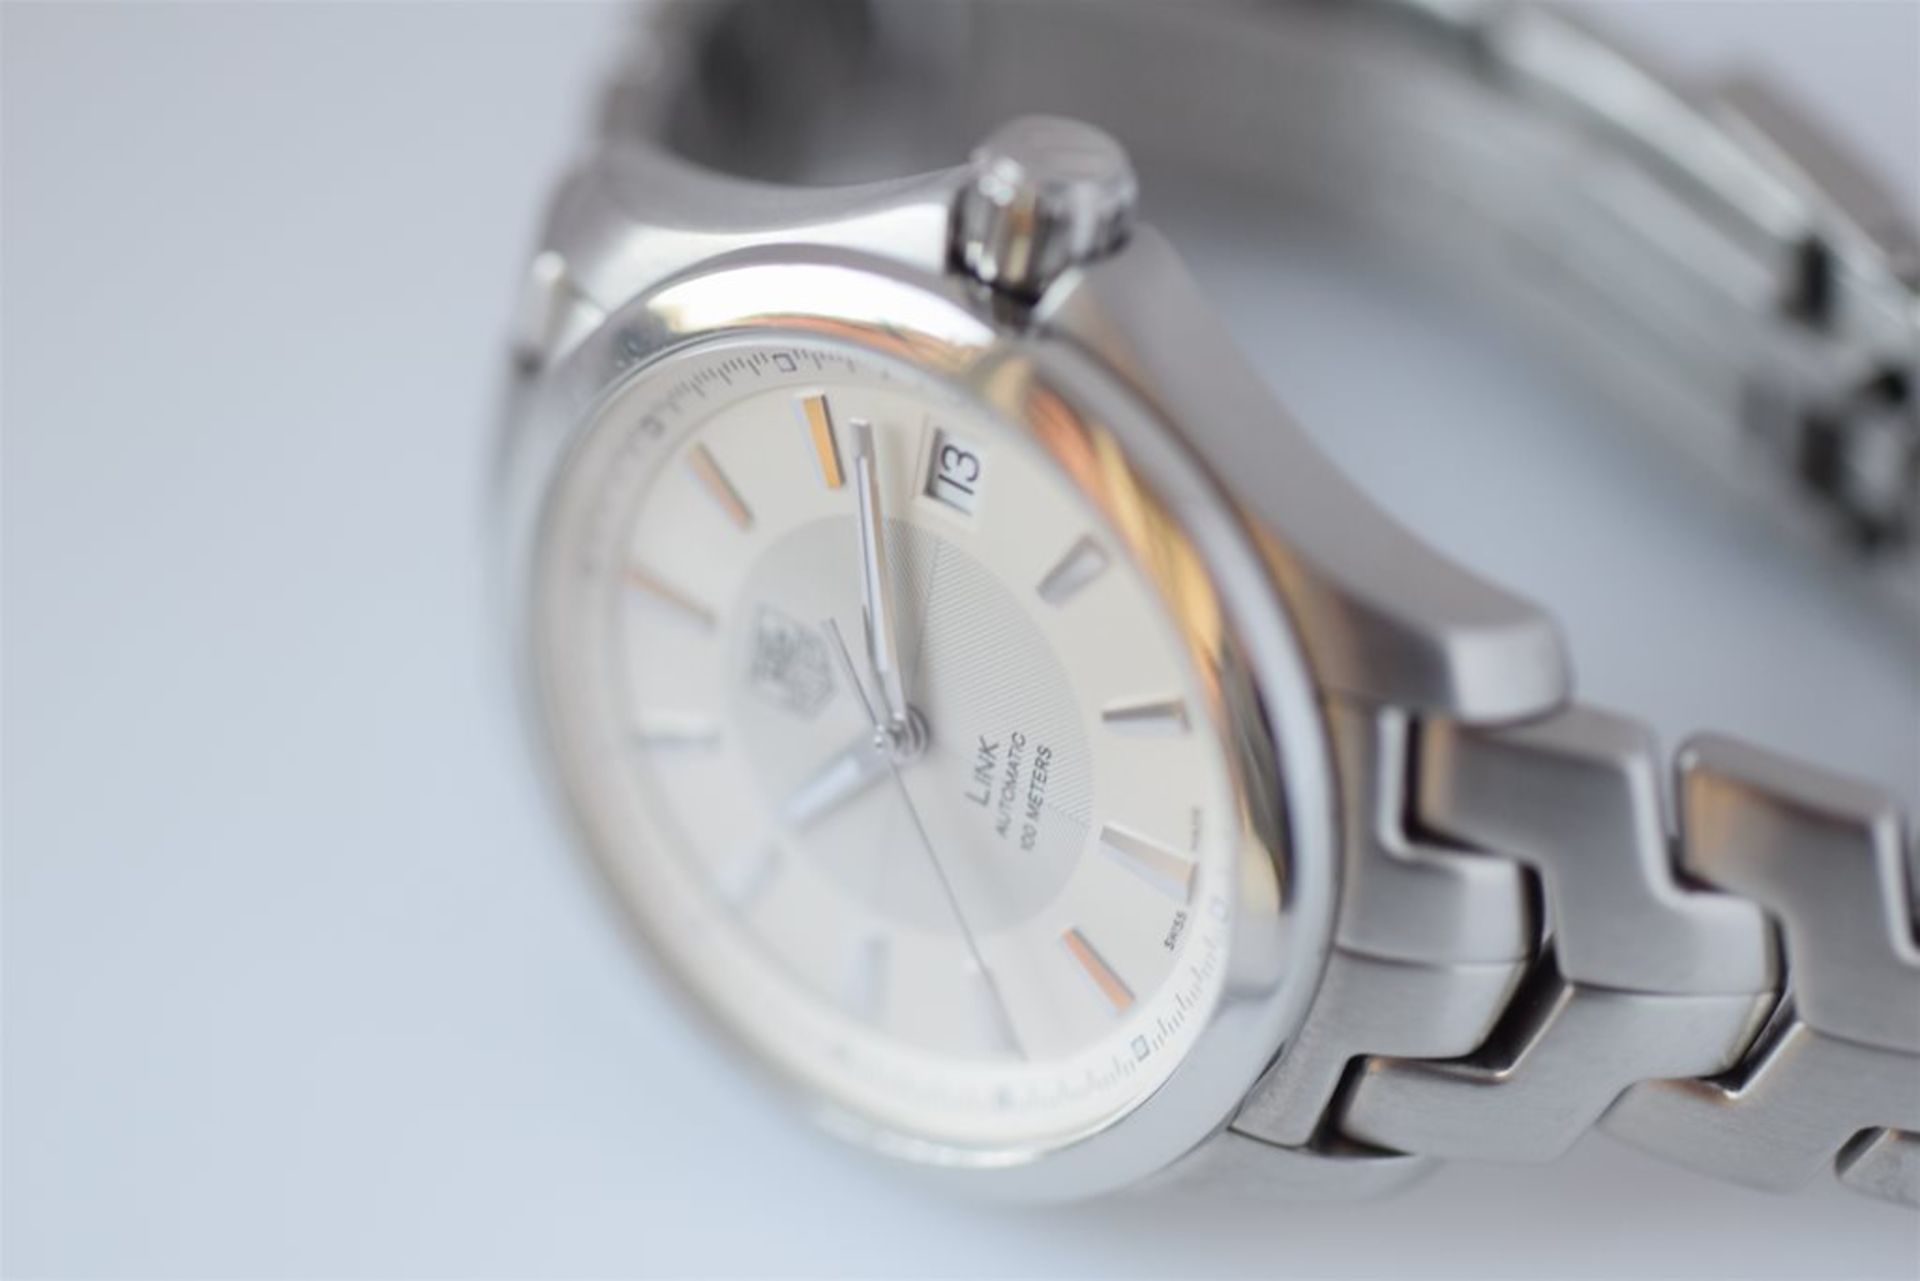 TAG HEUER LINK WJF2211 BA0586 AUTOMATIC WATCH - Image 10 of 10